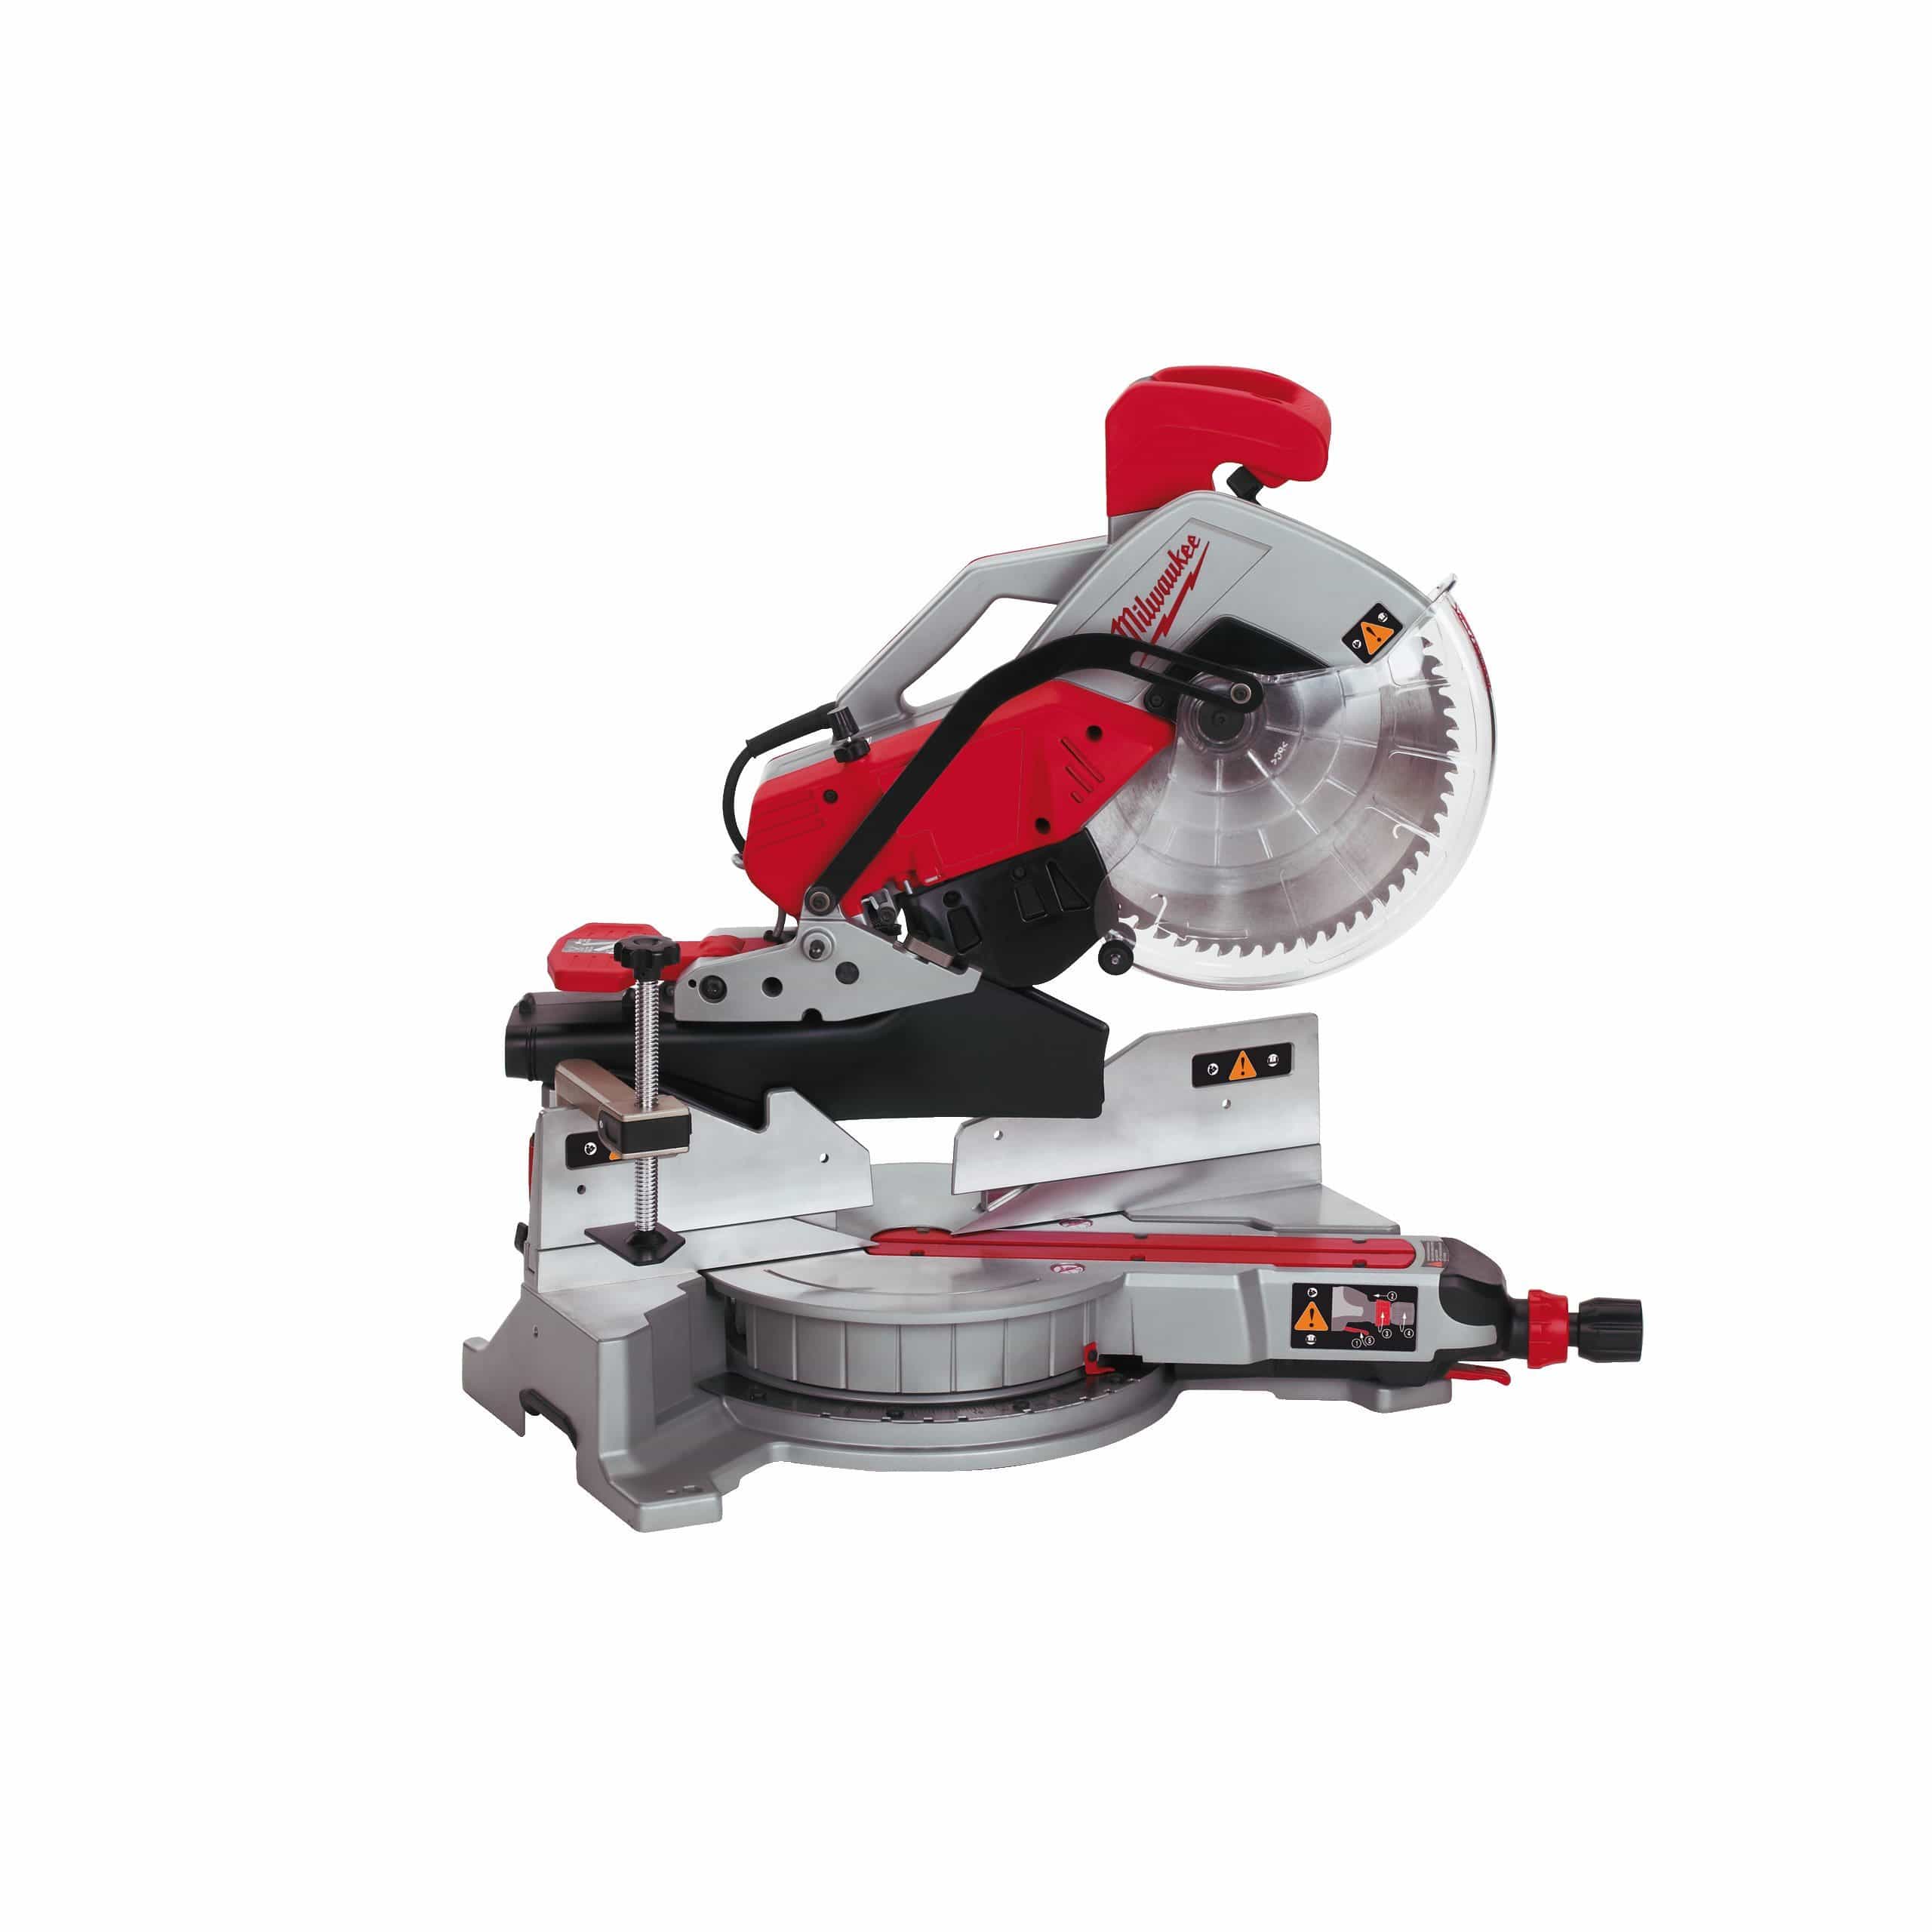 Milwaukee Dual Bevel Sliding Mitre Saw 12″ (305mm) 1800W - MS 304 DB | Supply Master | Accra, Ghana Tools Building Steel Engineering Hardware tool